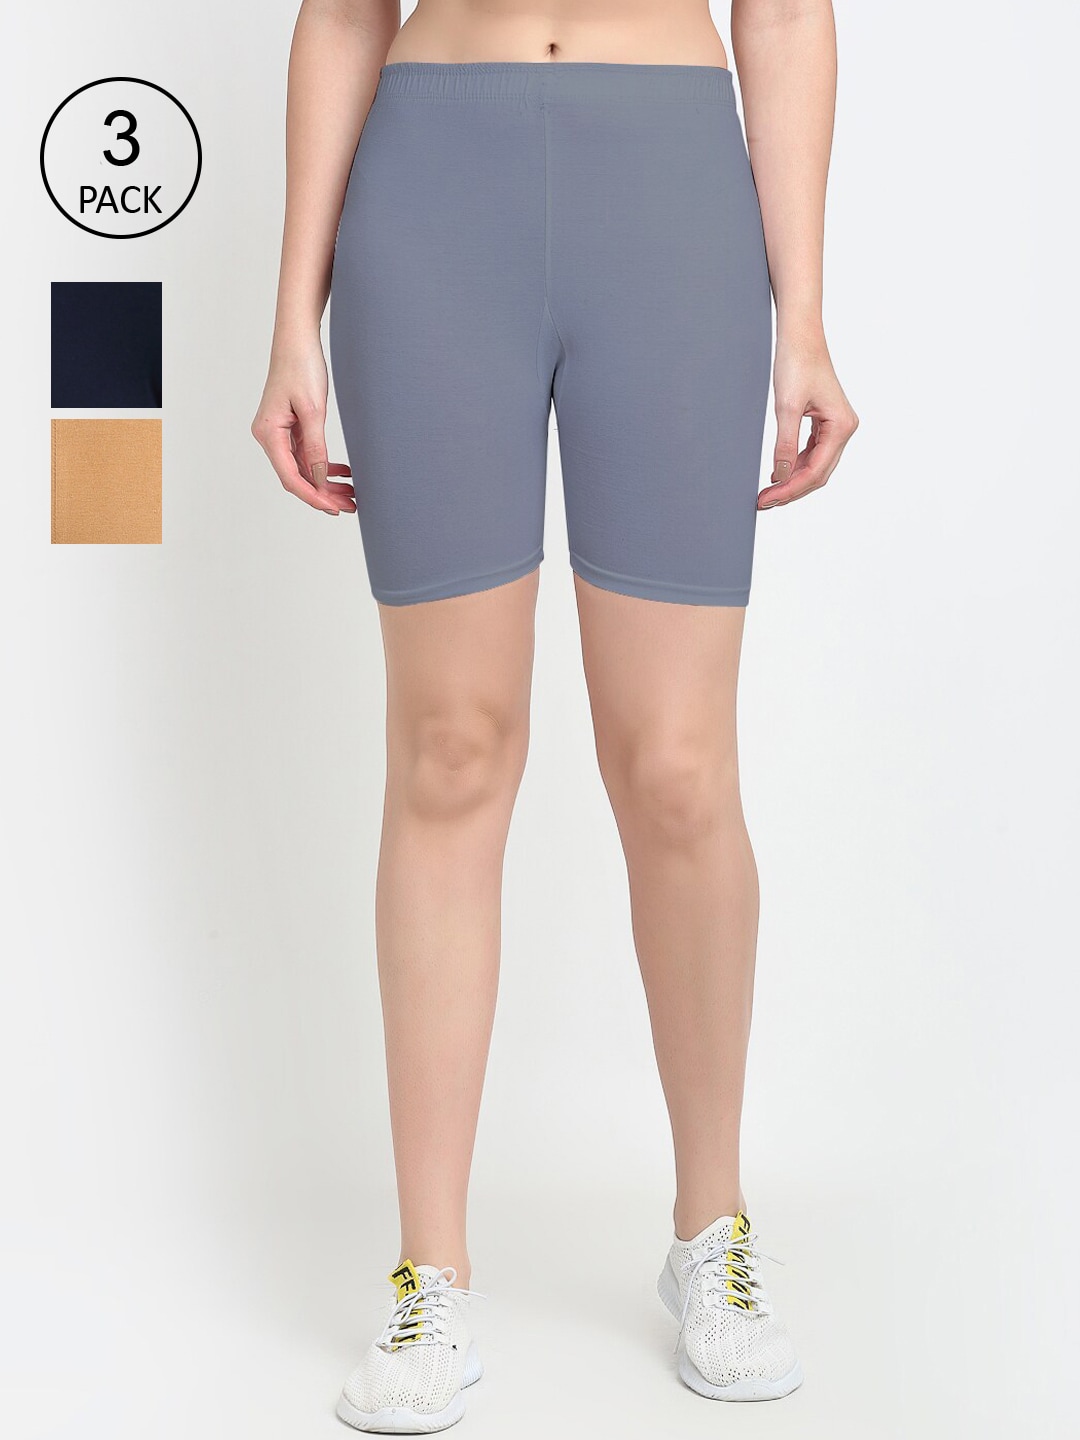 GRACIT Women Grey Cycling Sports Shorts Price in India